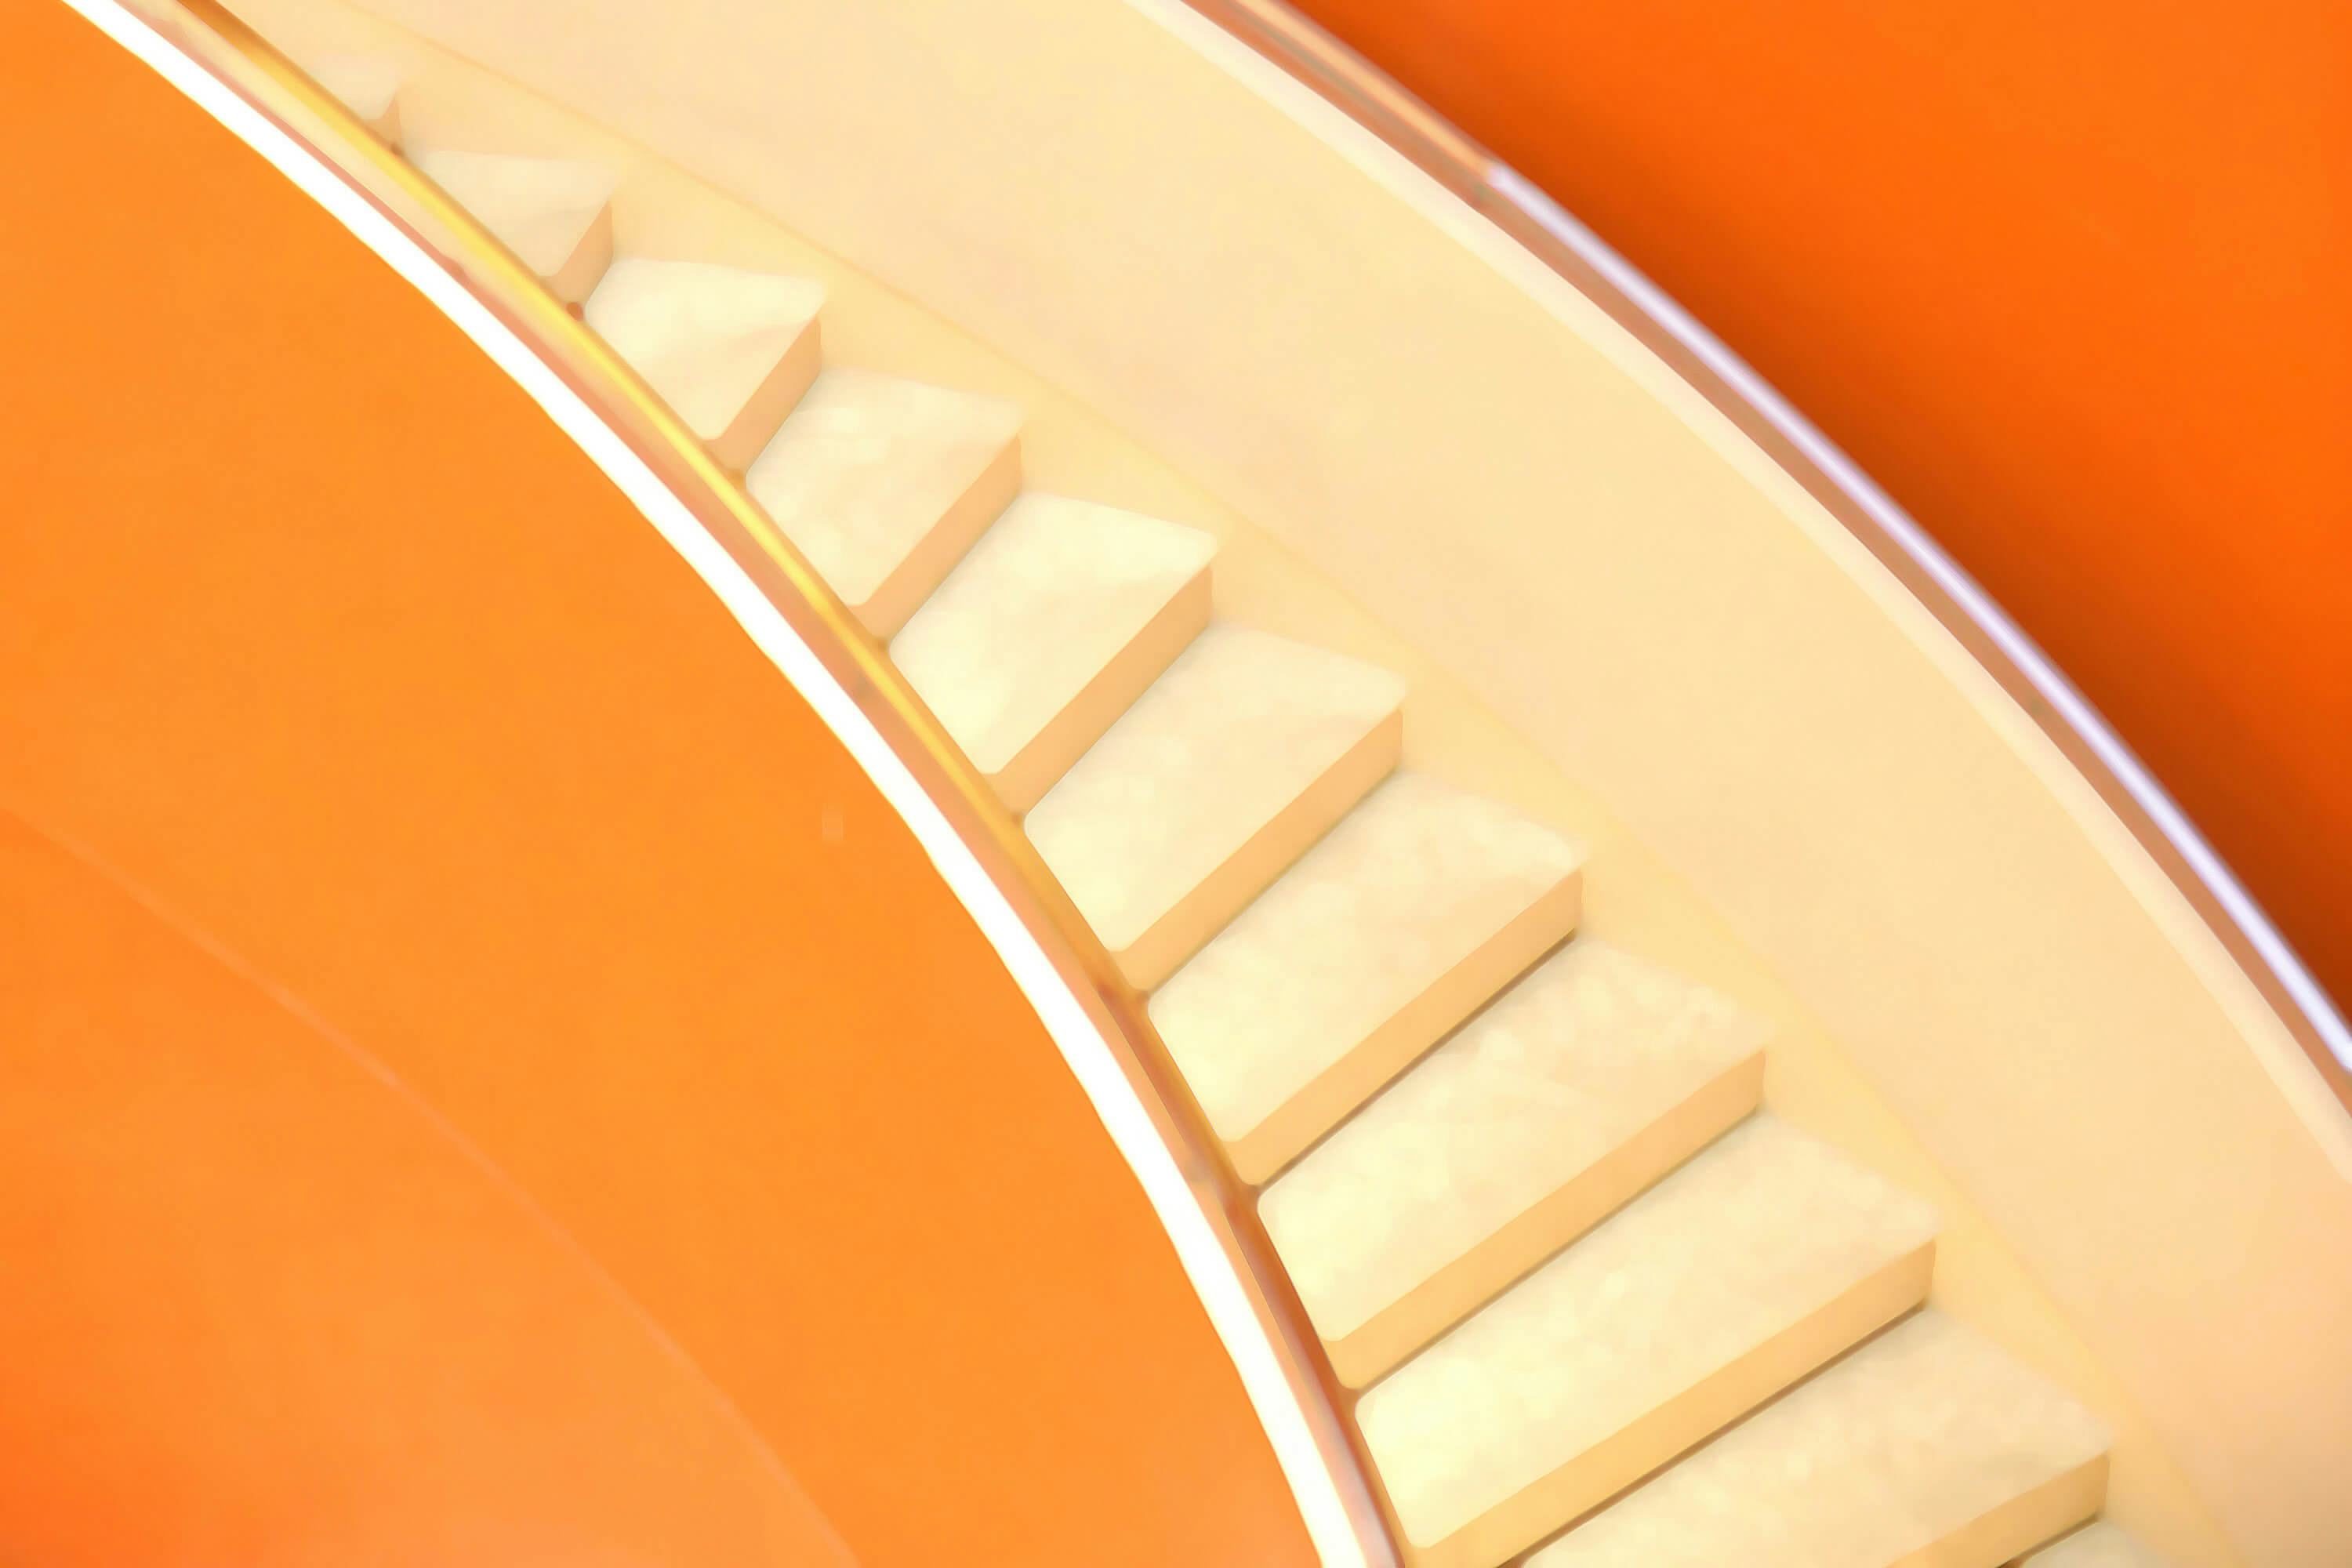 Abstract image - close-up of a notched golden ring against an orange background